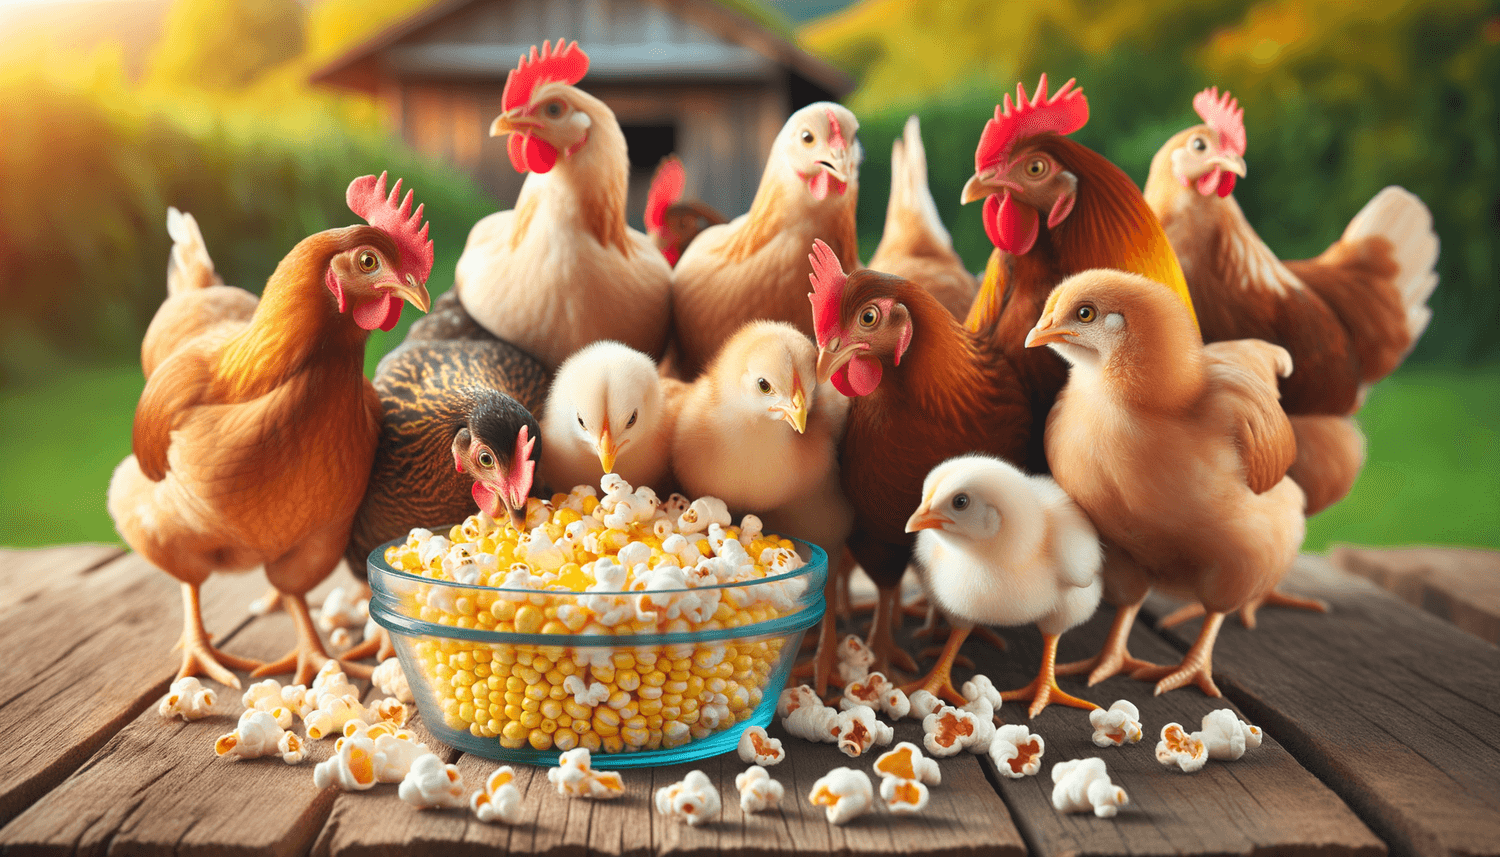 Can Chickens Eat Popcorn Kernels?